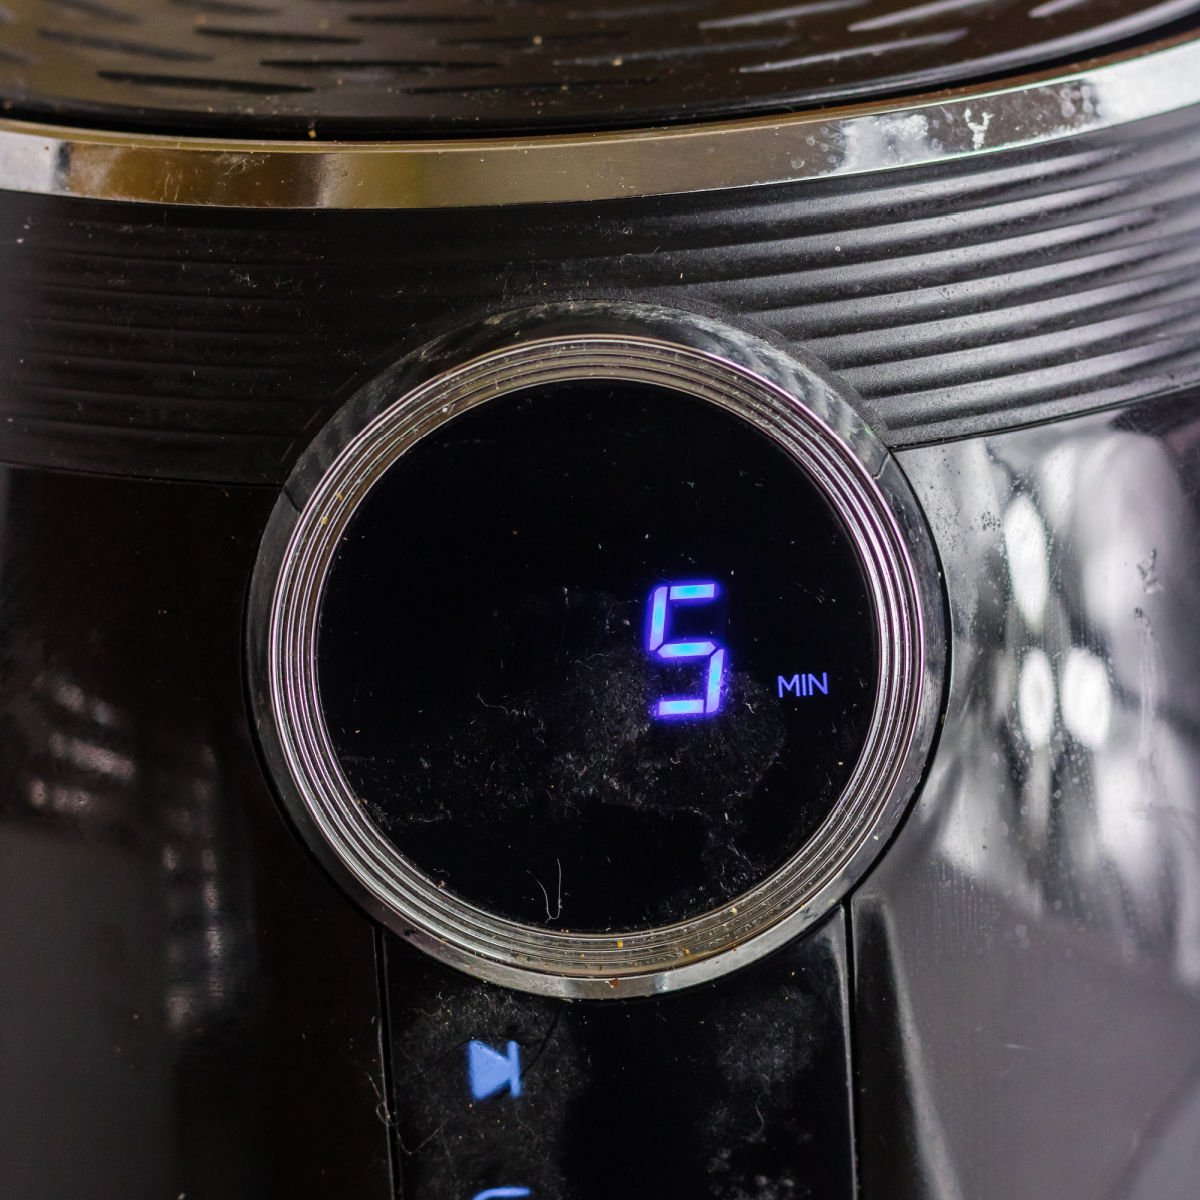 Air fryer with the timer set for 5 minutes.